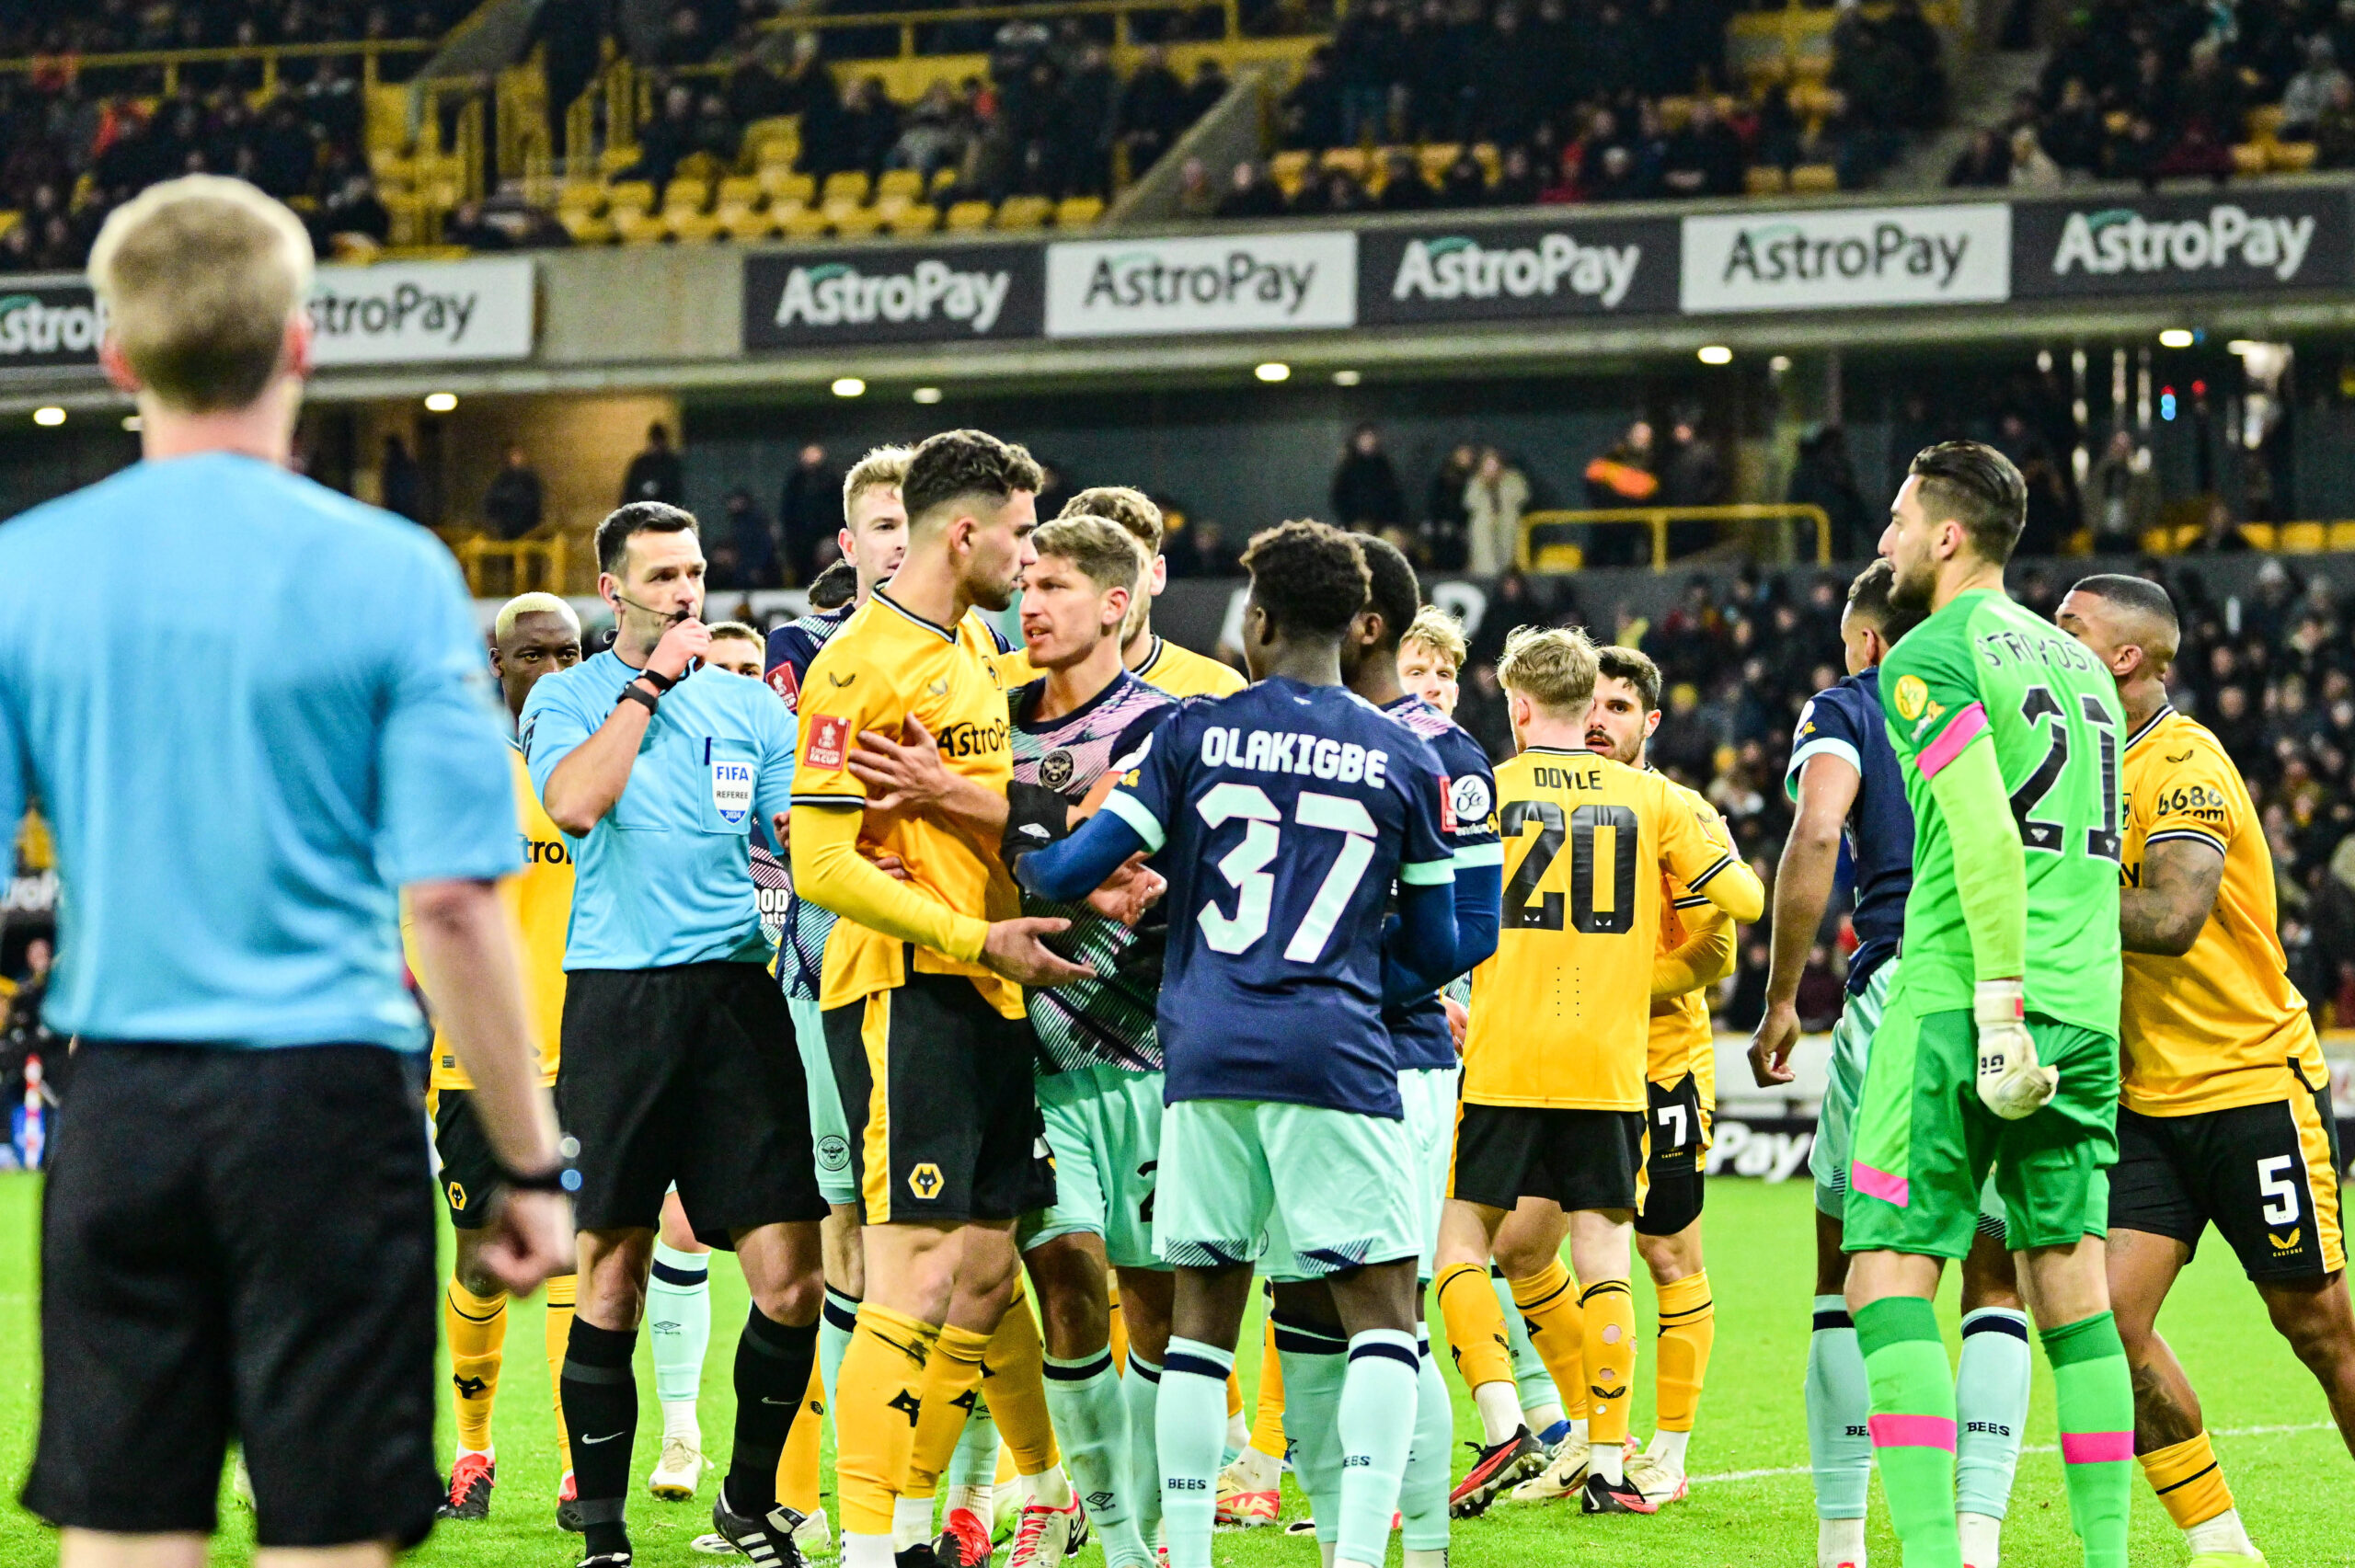 Tempers flare between Wolves players and opposition during a match